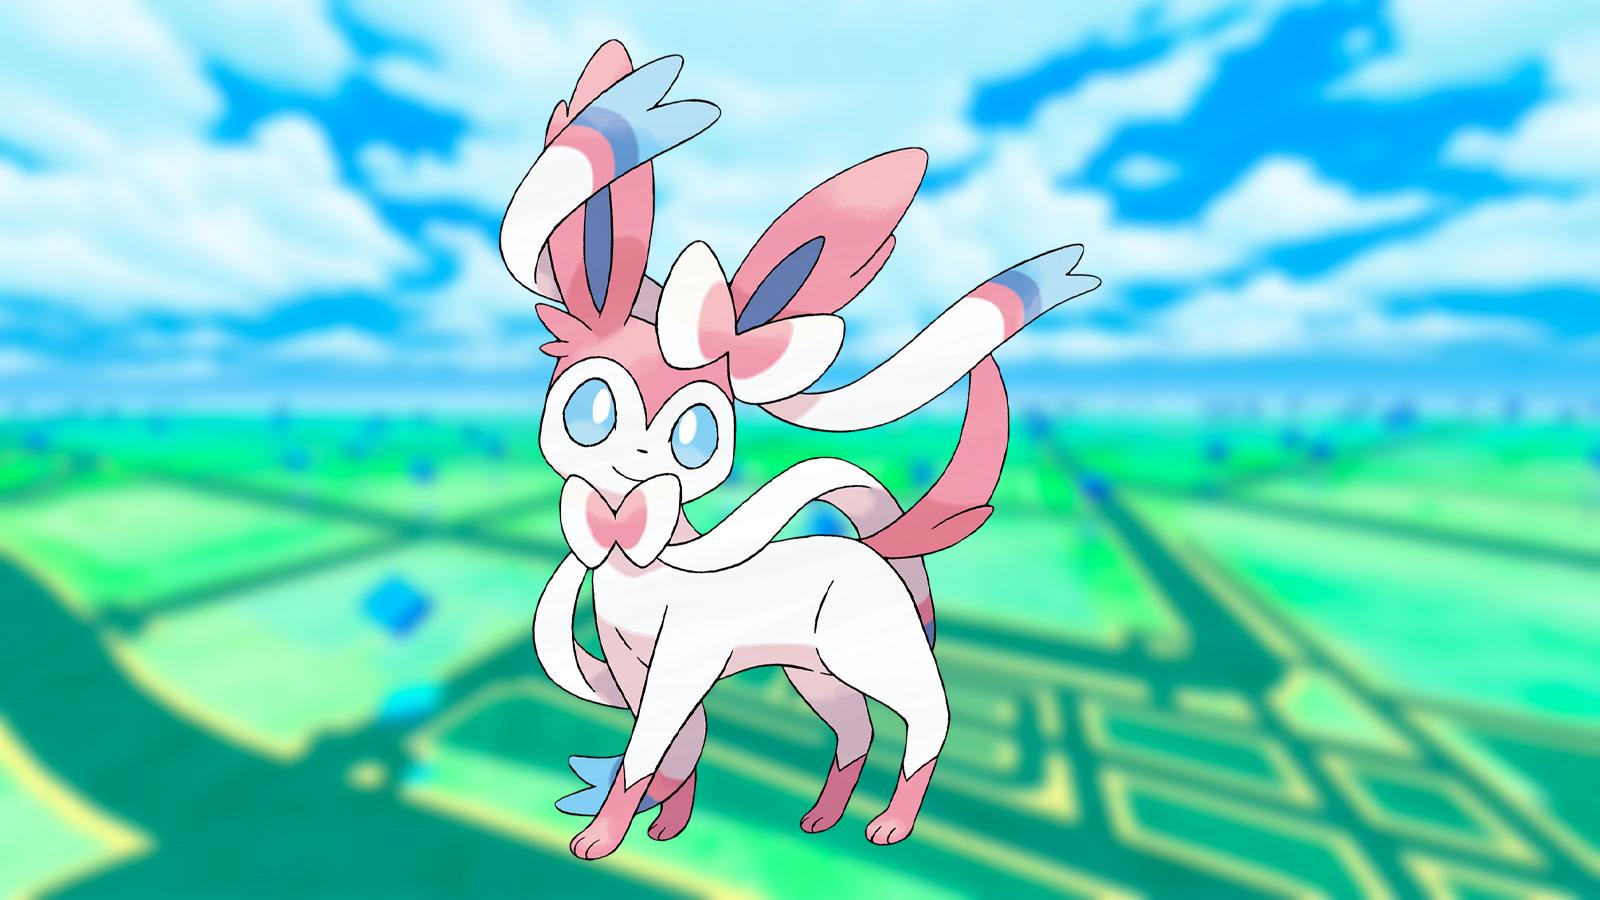 Artwork of Sylveon from the anime on top of a blurred background from Pokemon Go